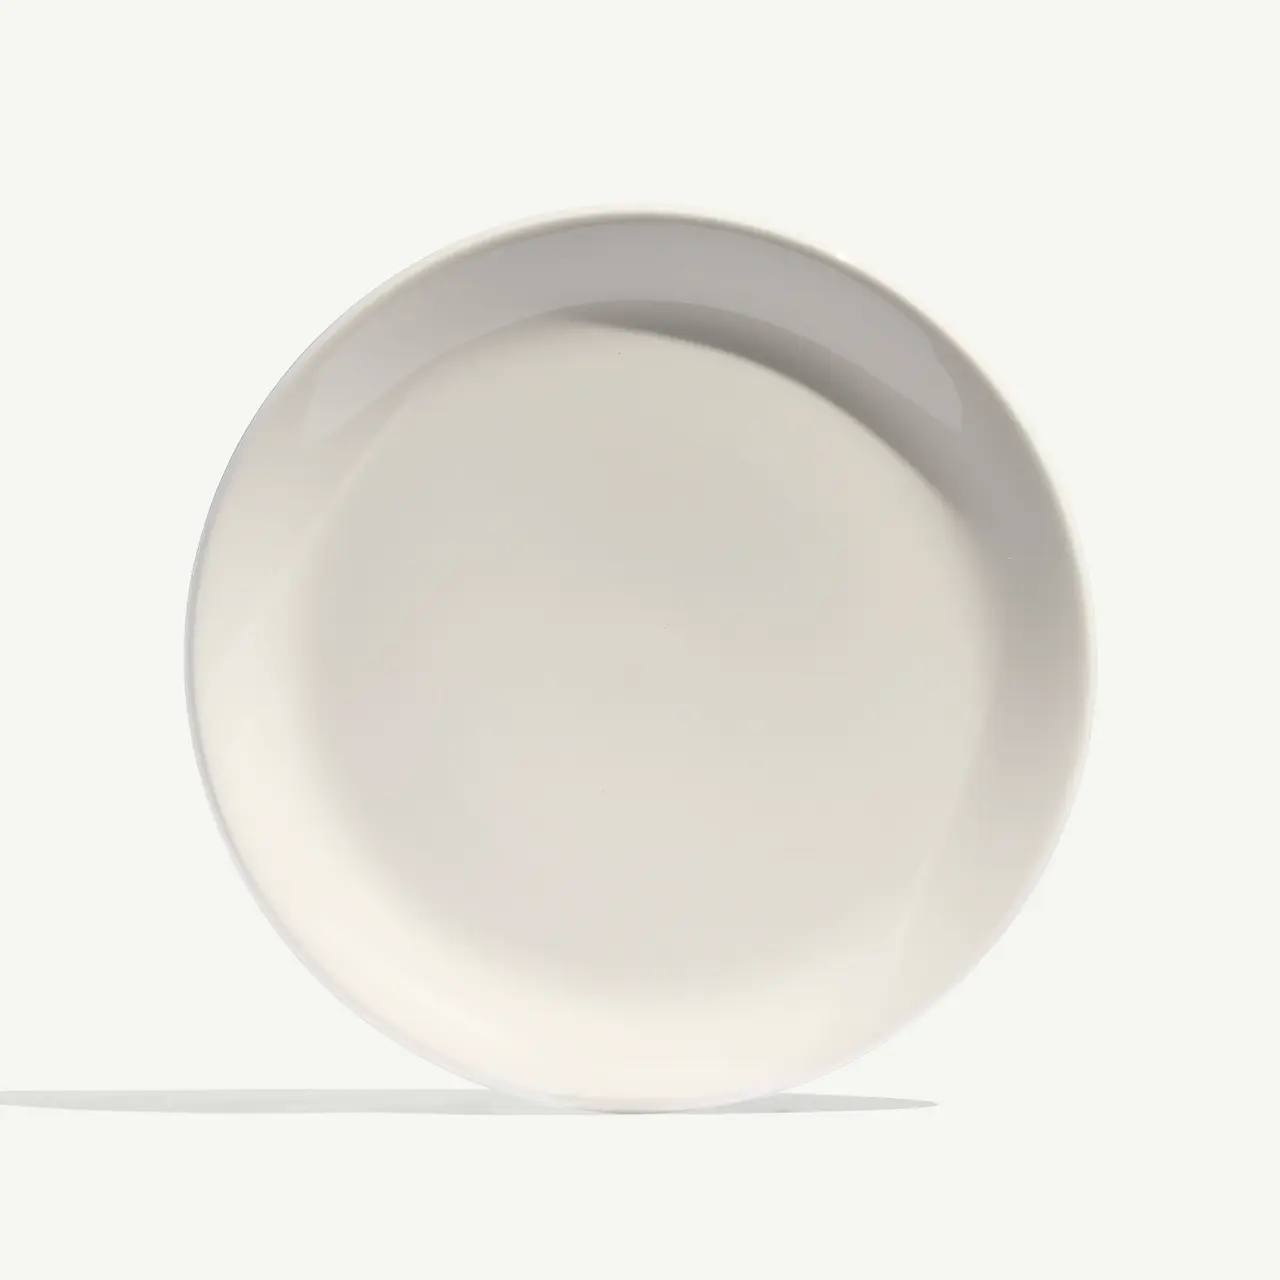 A plain white plate is presented against a soft white background, casting a subtle shadow.